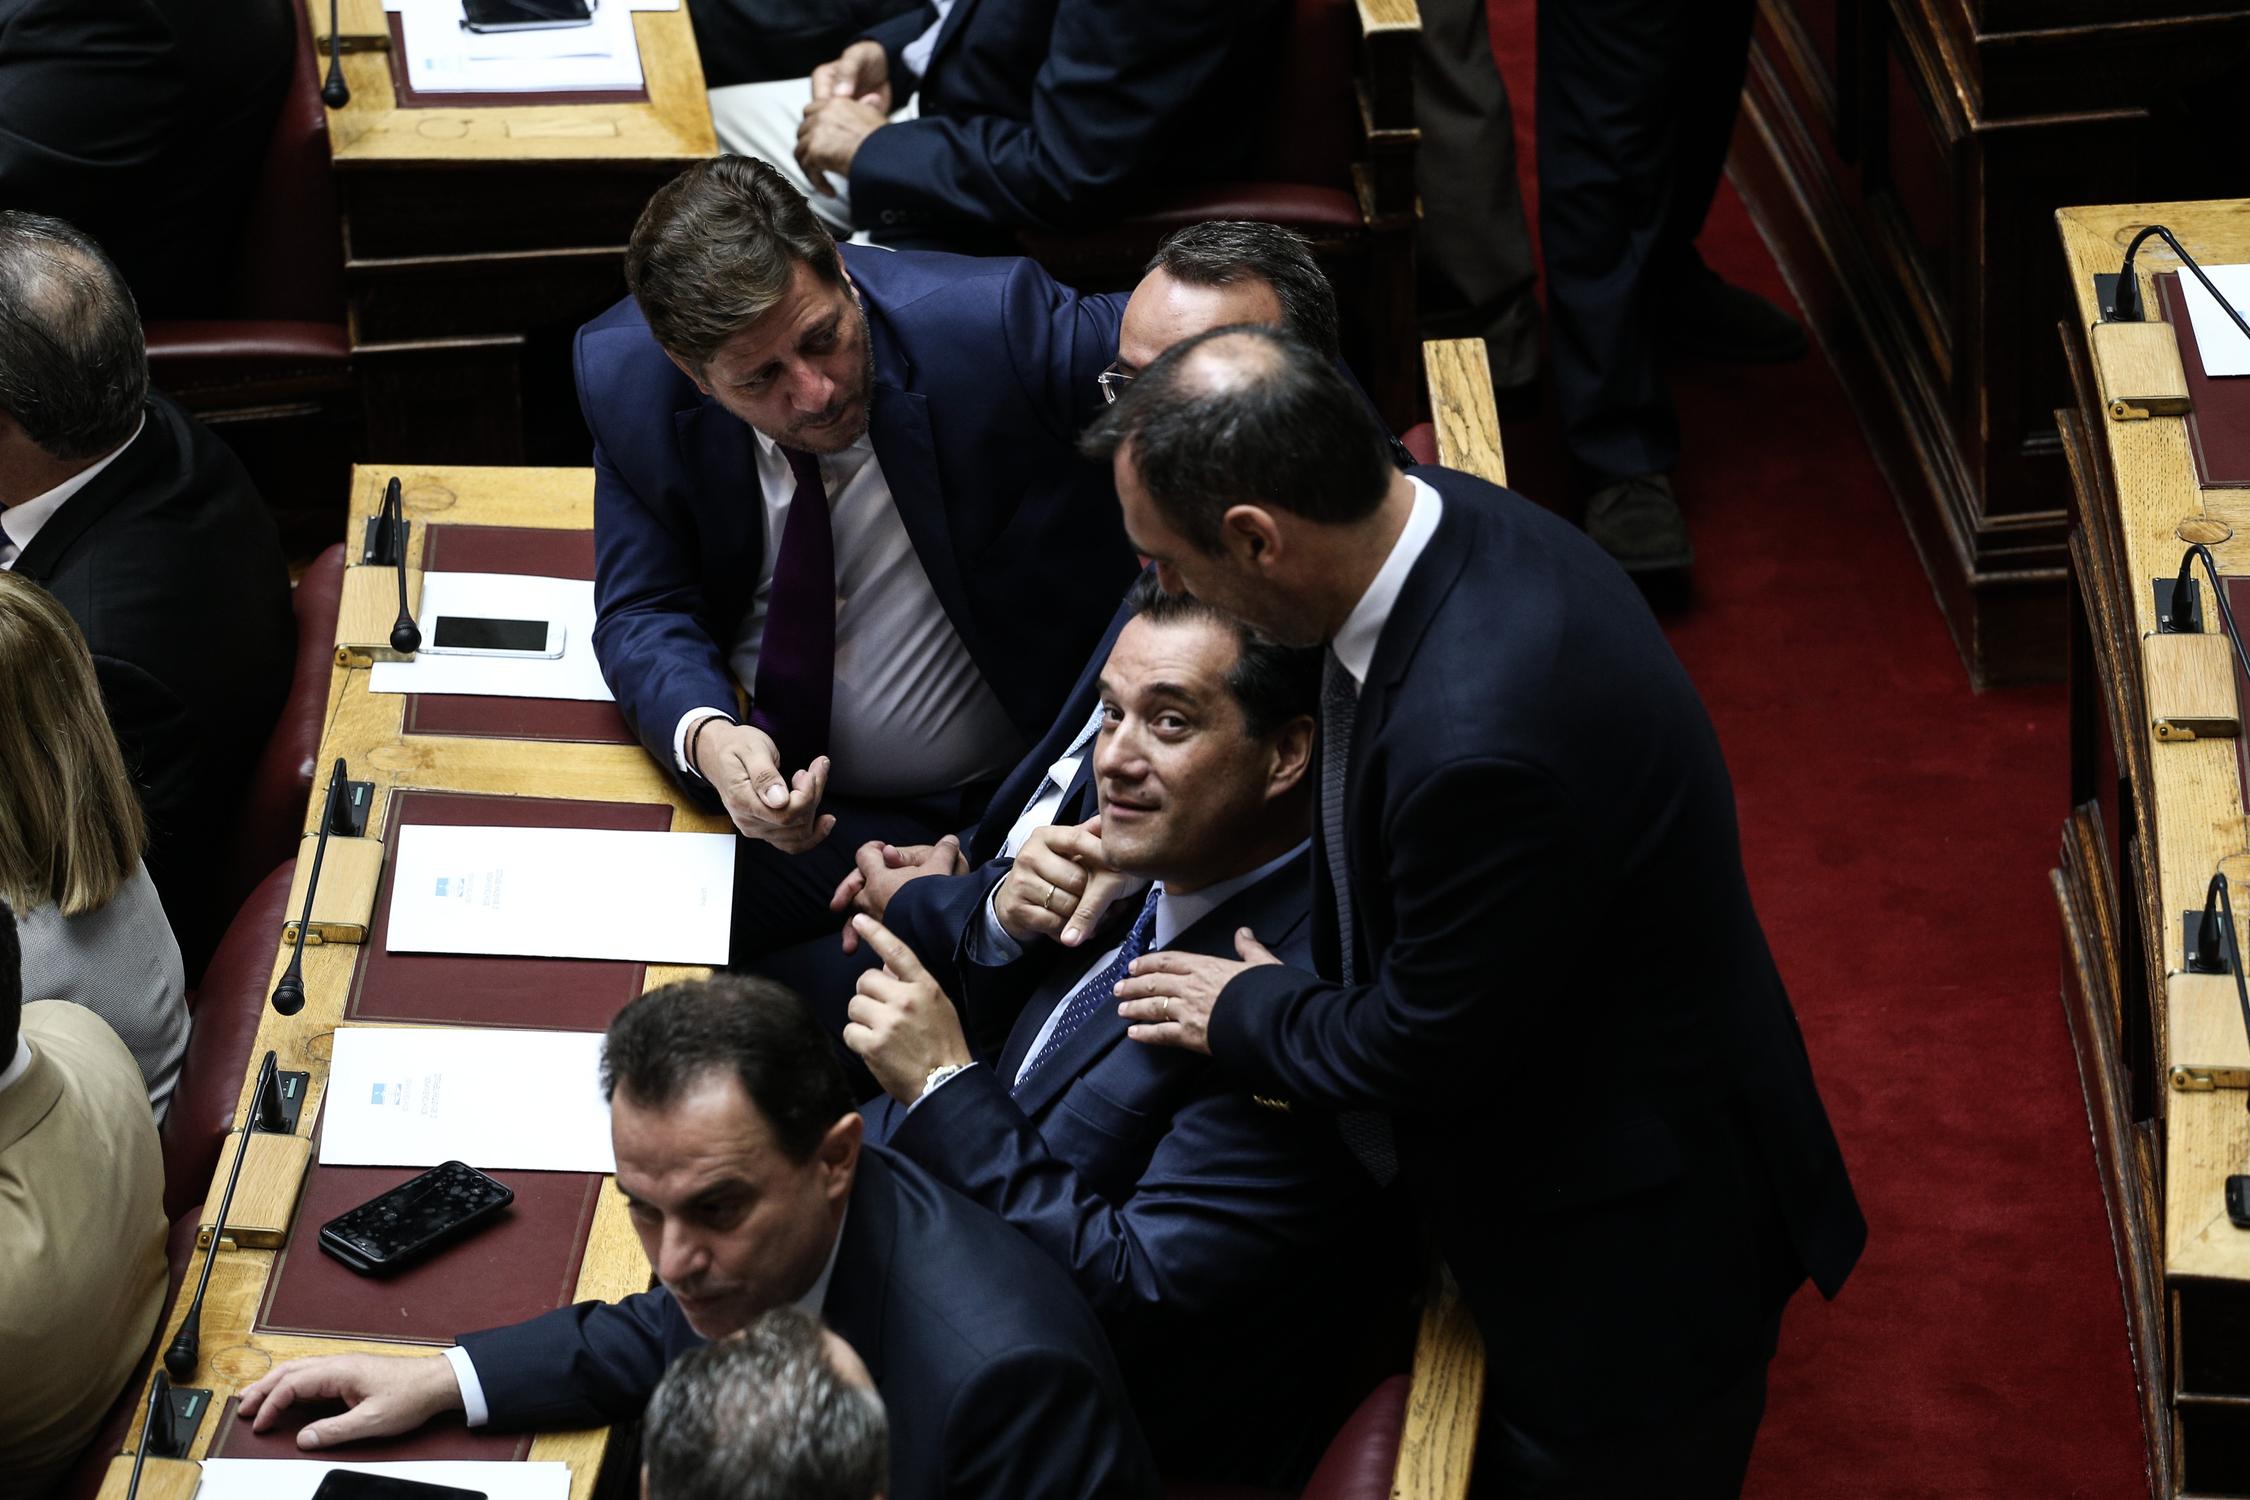 Swearing-in ceremony of the new Greek Parliament in Athens, Greece on Oct. 3, 2015. / Ορκωμοσία της νέας Βουλής, Αθήνα, Ελλάδα στις 3 Οκτωβρίου 2015.